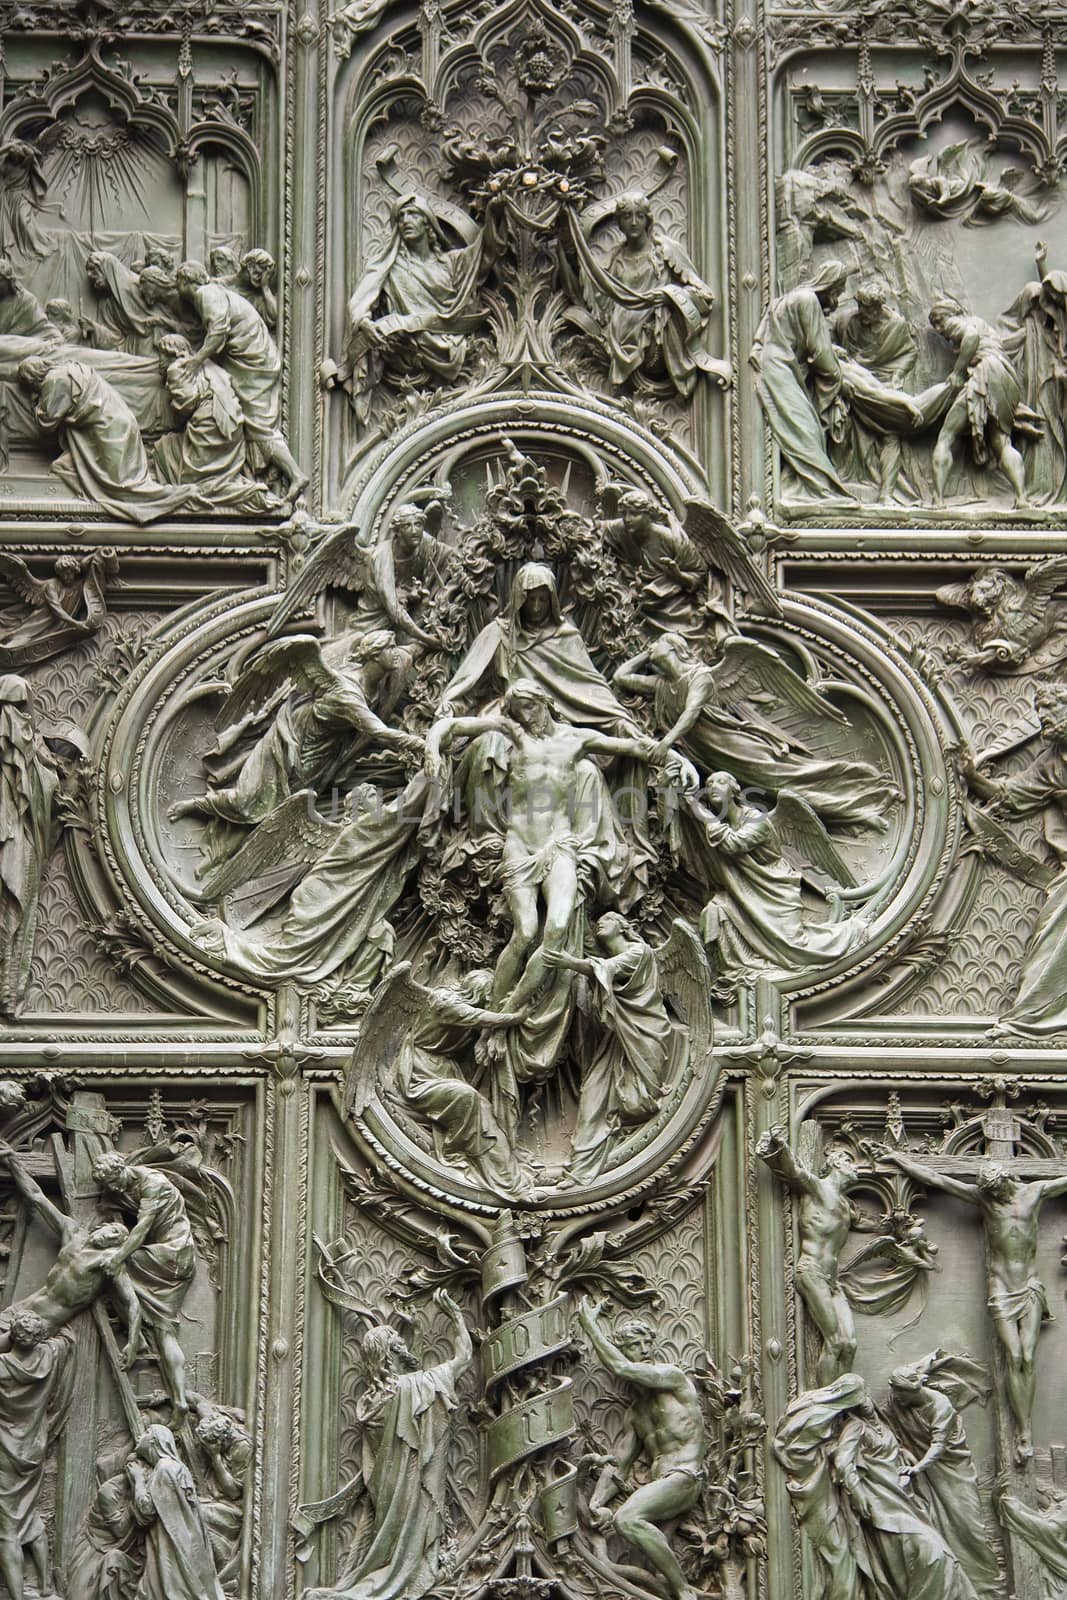 Doors of the Duomo cathedral in Milan, Italy.